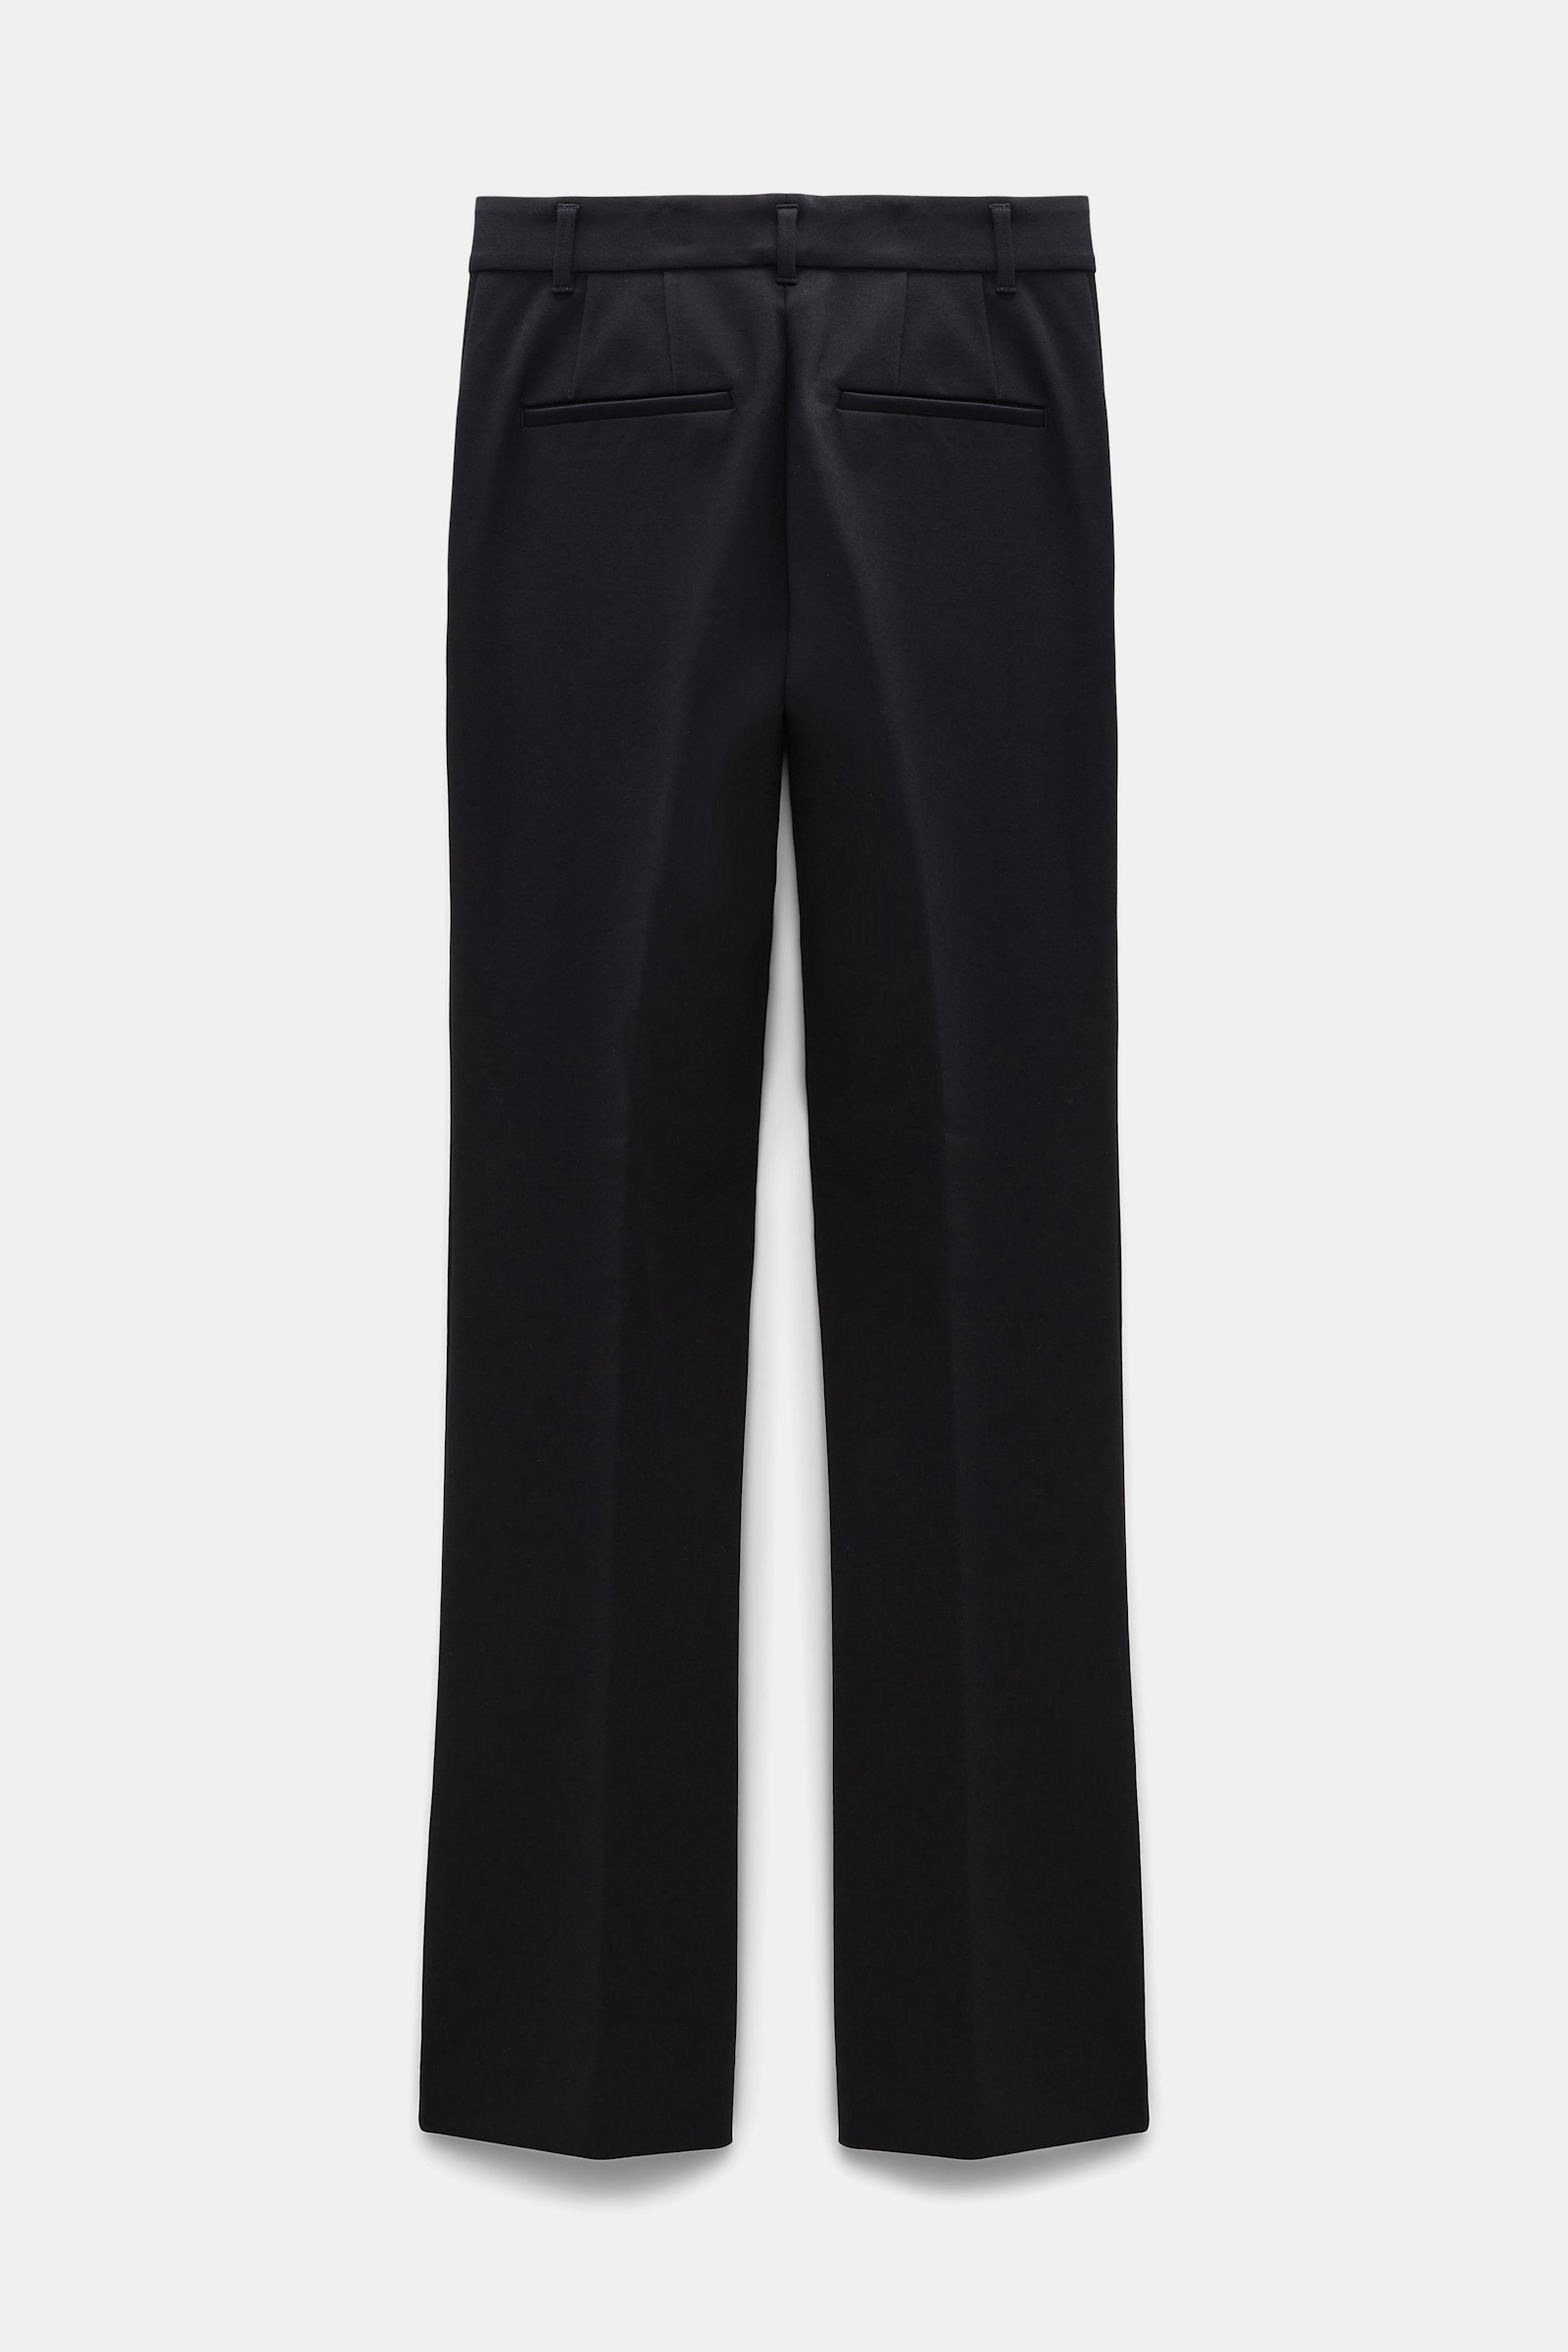 Dorothee Schumacher FLARED PANTS IN PUNTO MILANO pure black